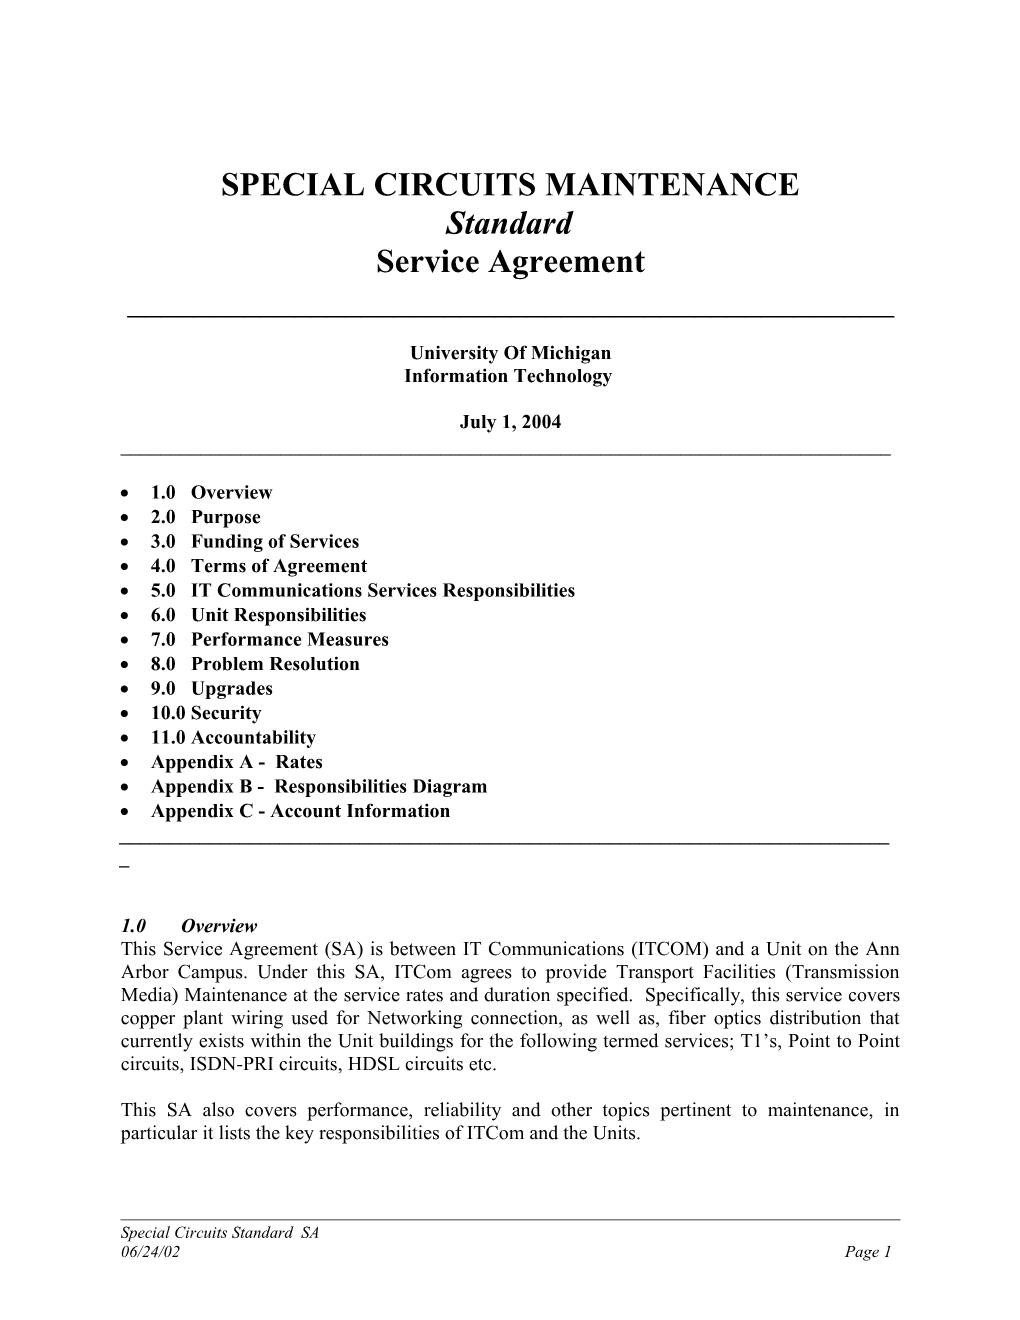 Special Circuits Maintenance